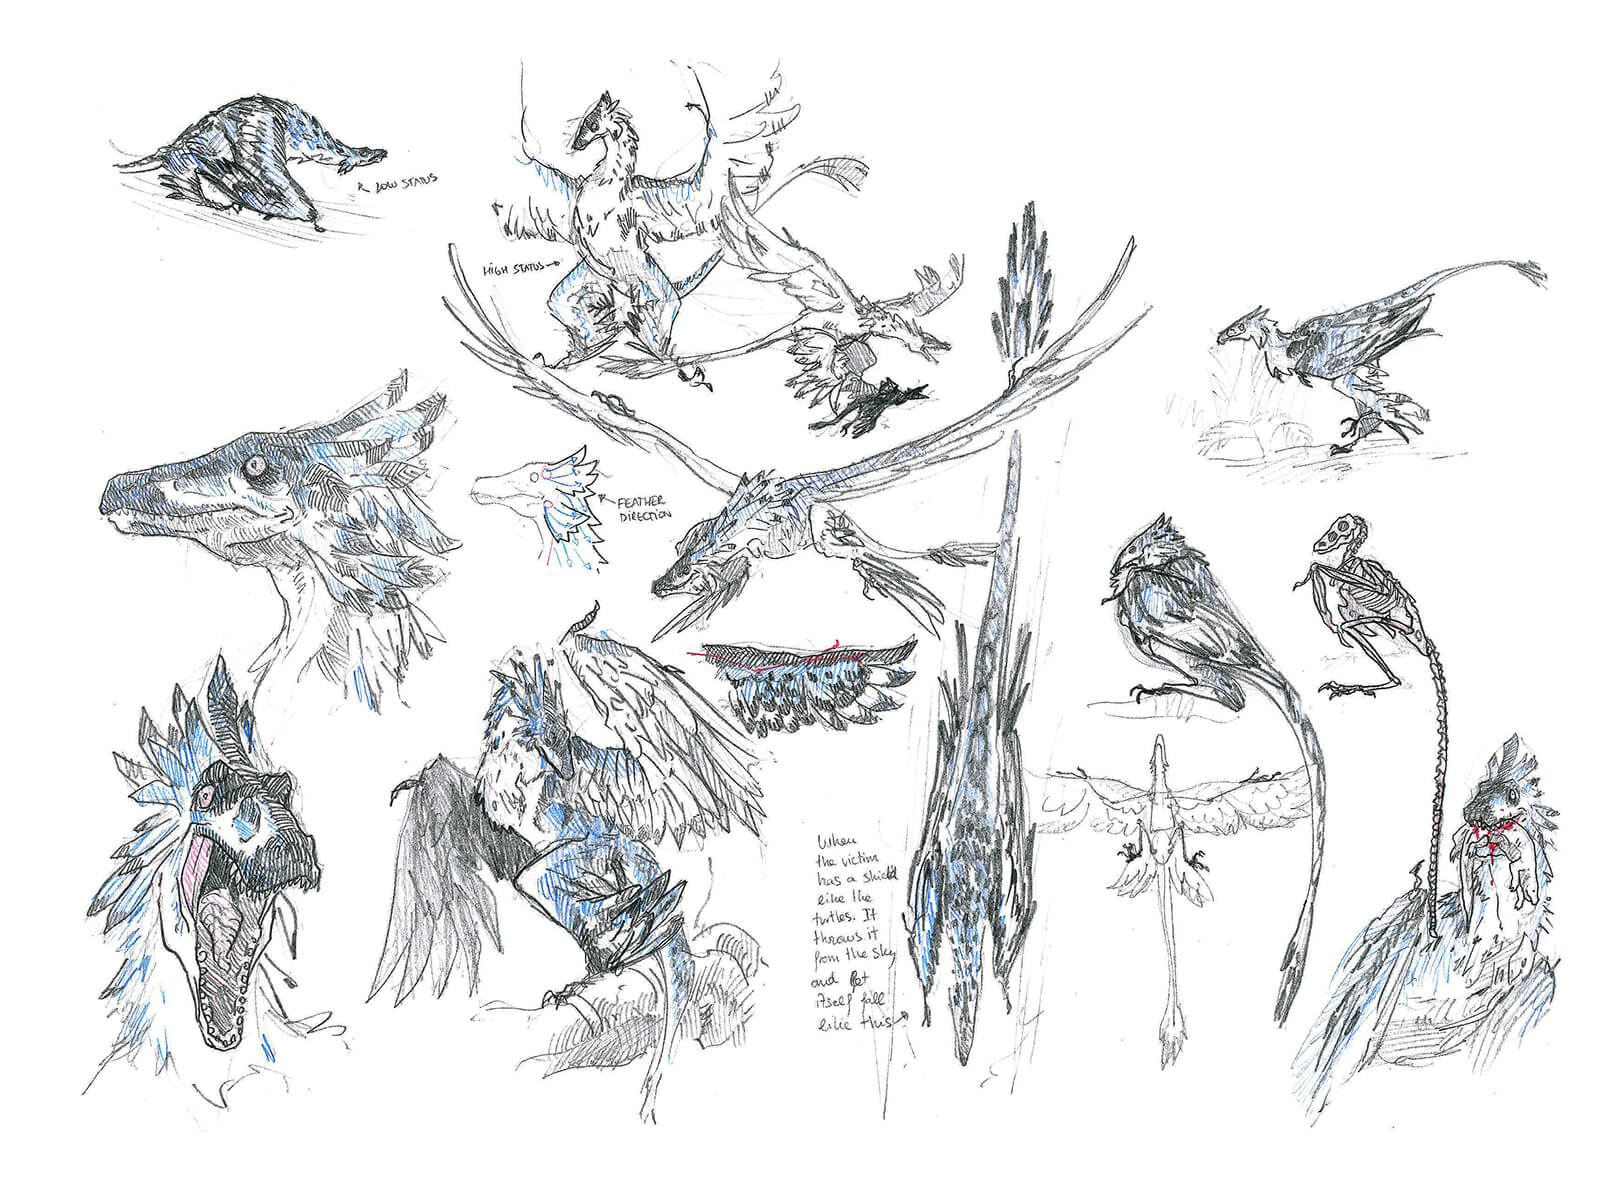 Black-and-white sketches of a feathered prehistoric raptor in poses such as flight, perching, eating, and walking